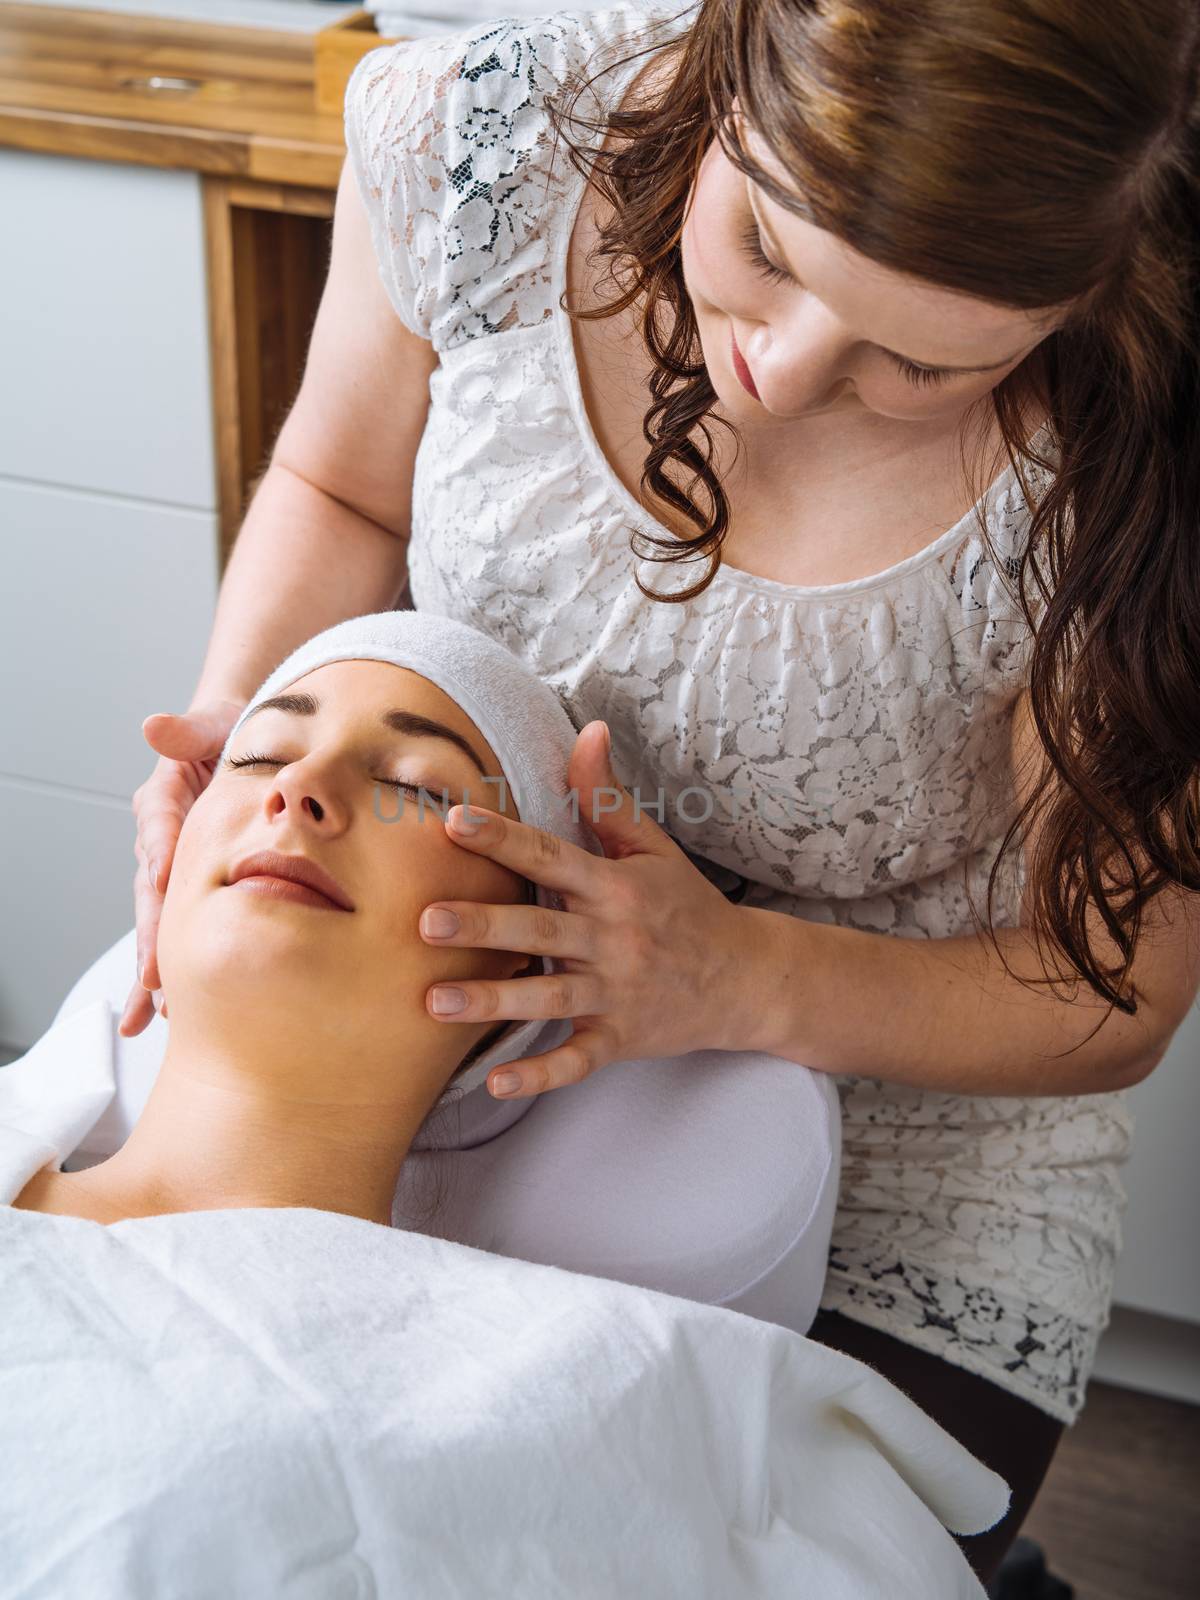 Photo of a young woman receiving a facial massage and treatment.